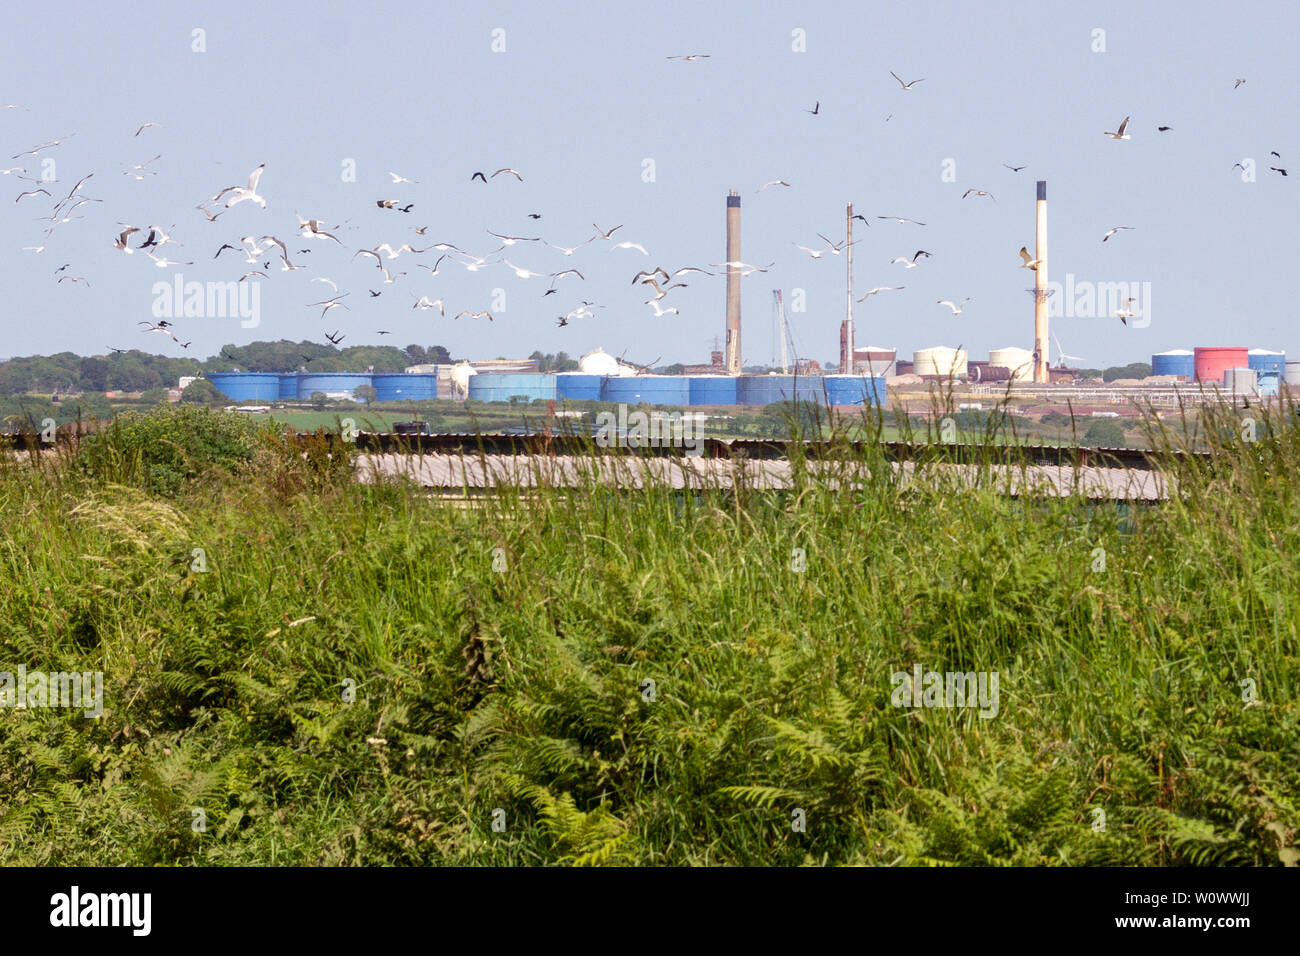 Distant view of Milford Haven oil refinery, South Wales, with seagulls flying into the sky in the foreground Stock Photo